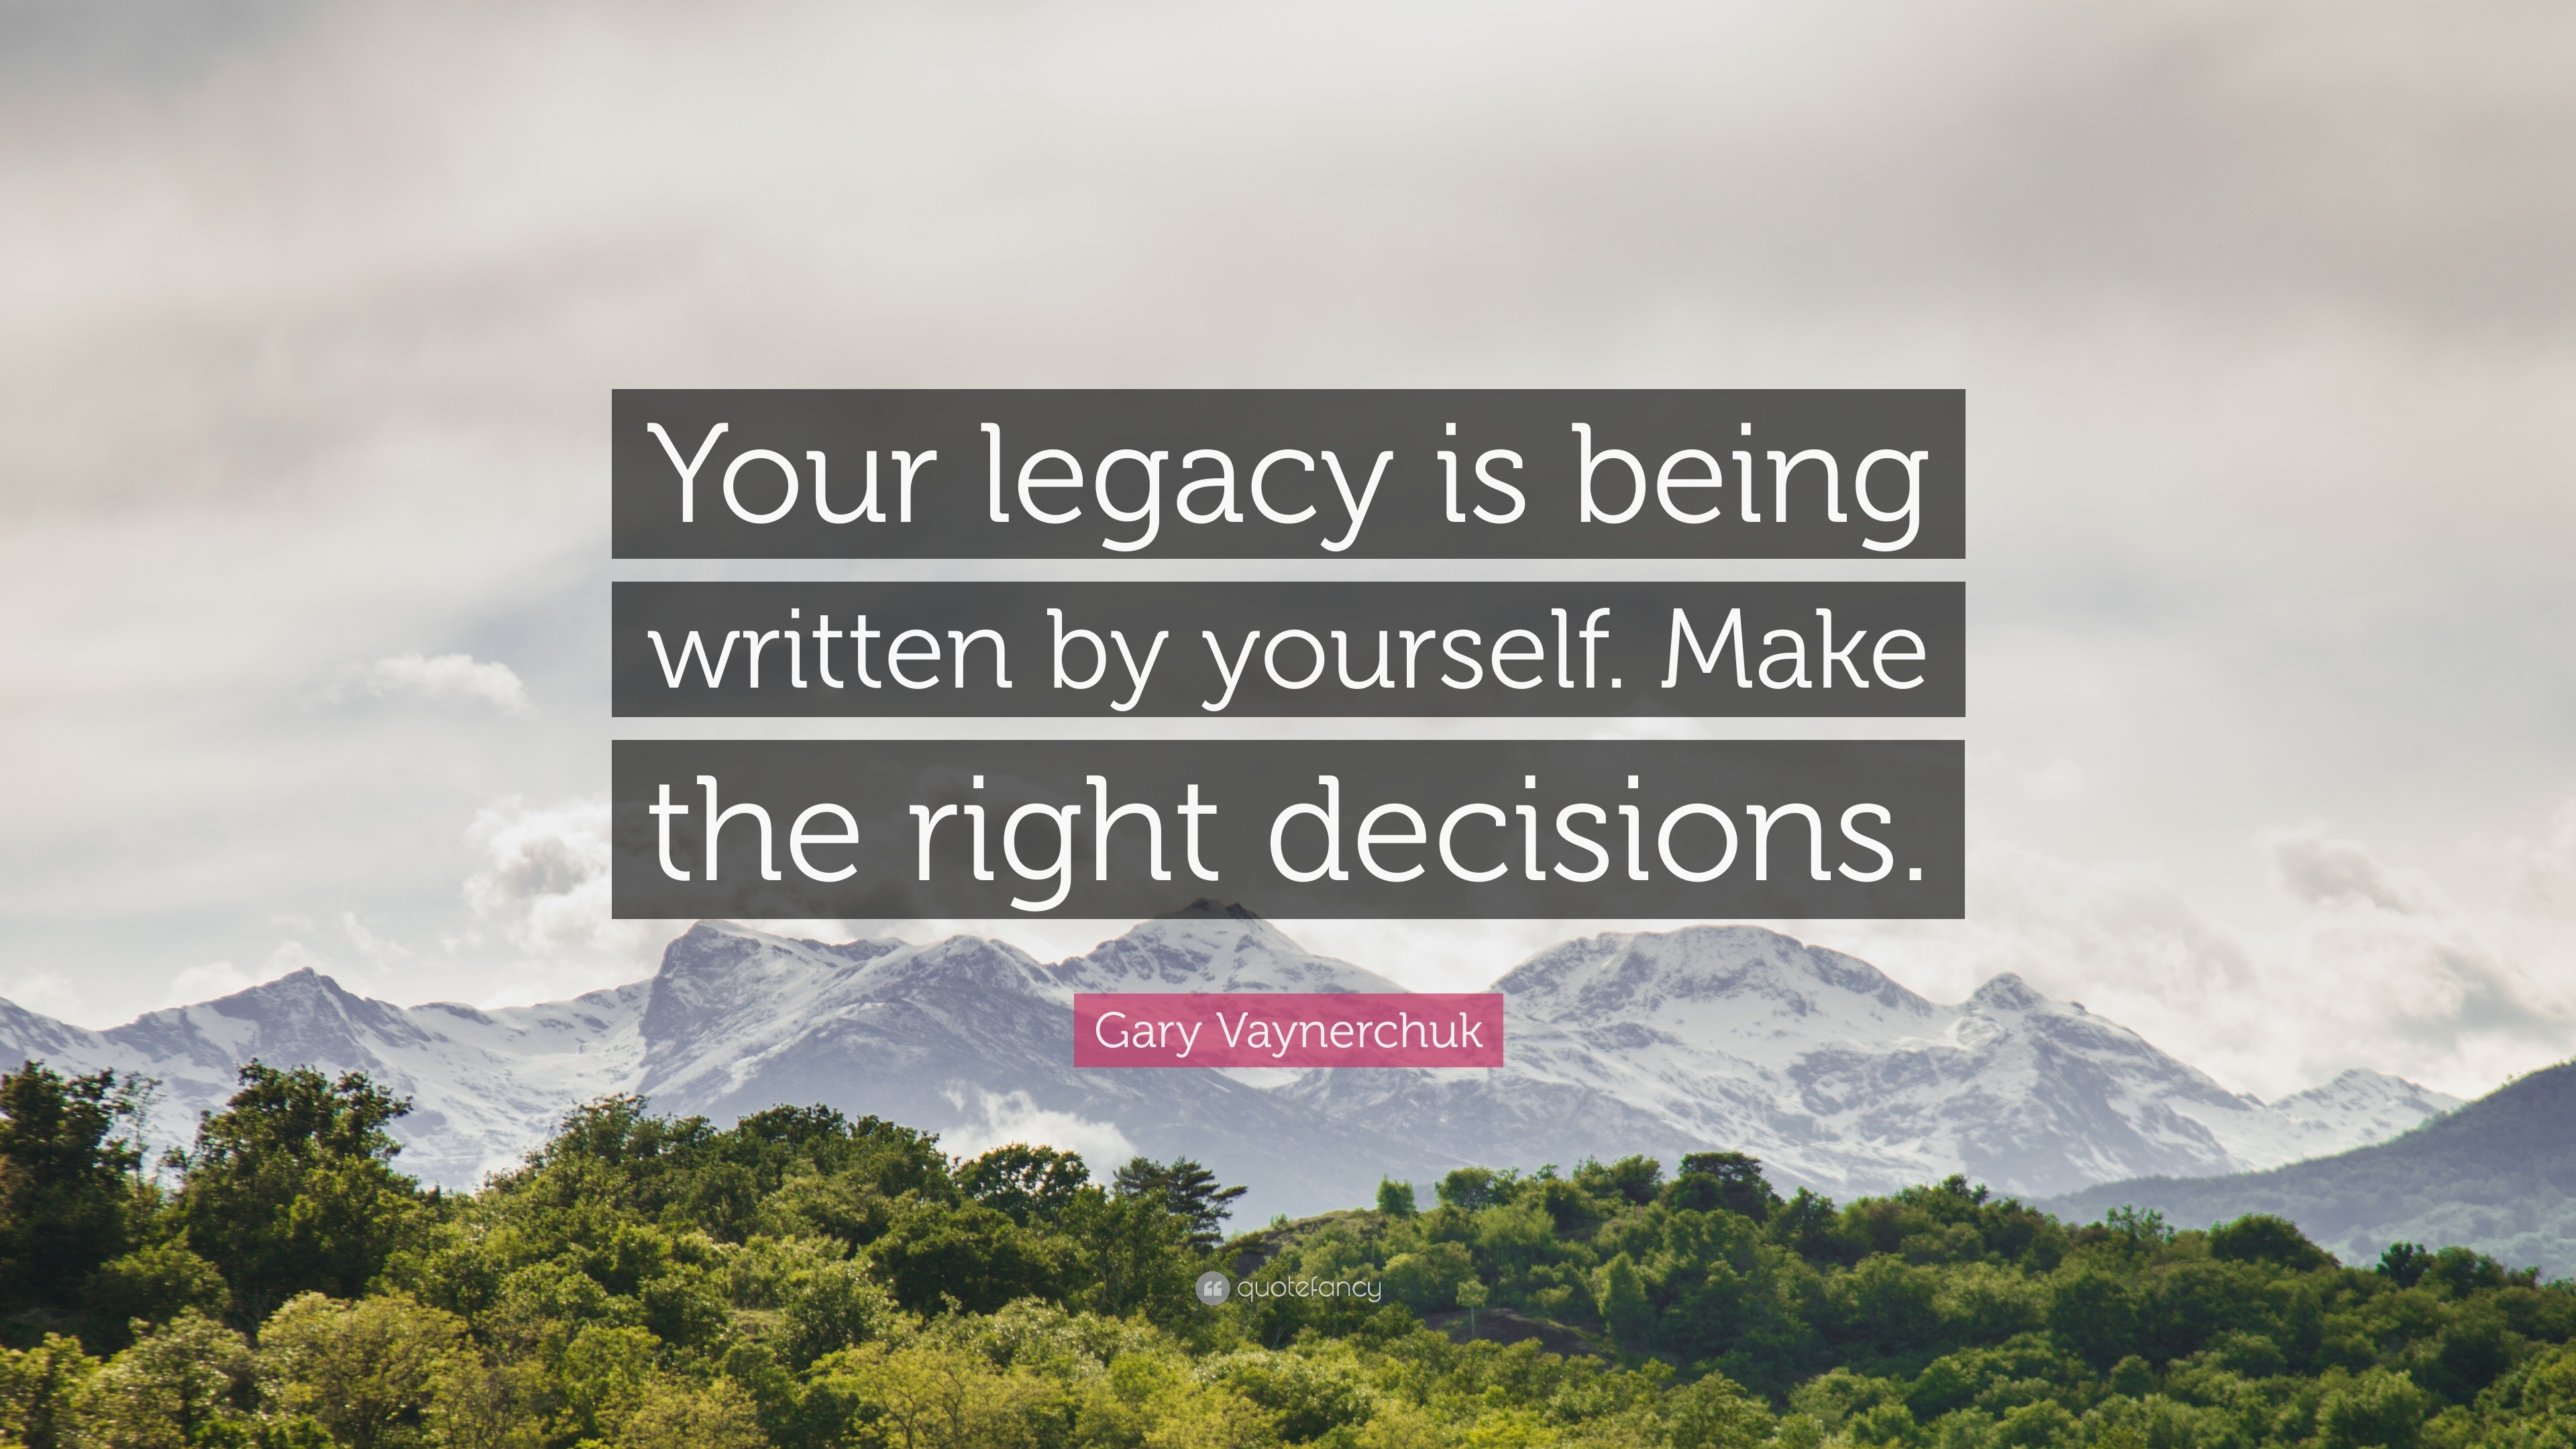 Gary Vaynerchuk Quote: “Your legacy is being written by yourself